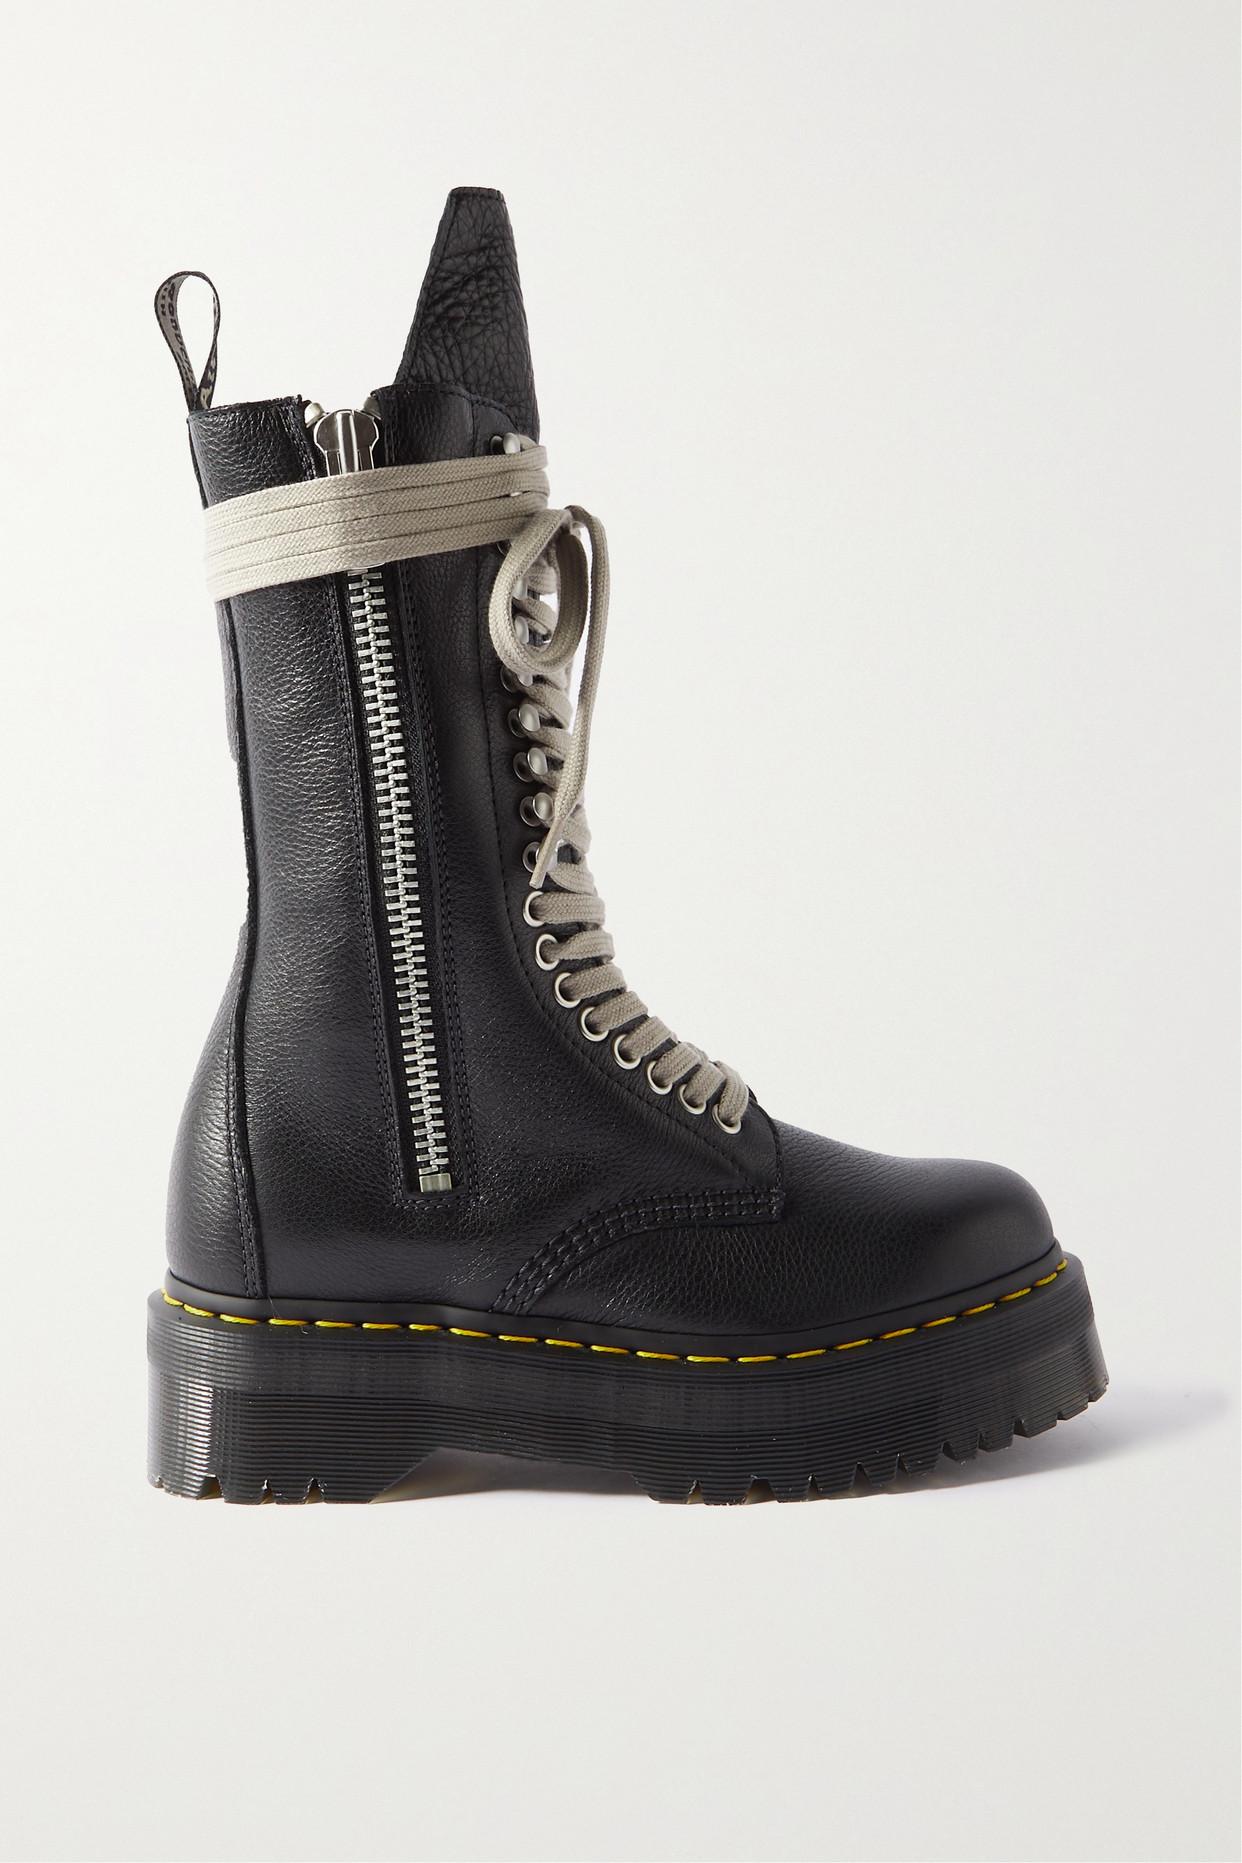 Rick Owens + Dr. Martens Leather Boots in Black | Lyst